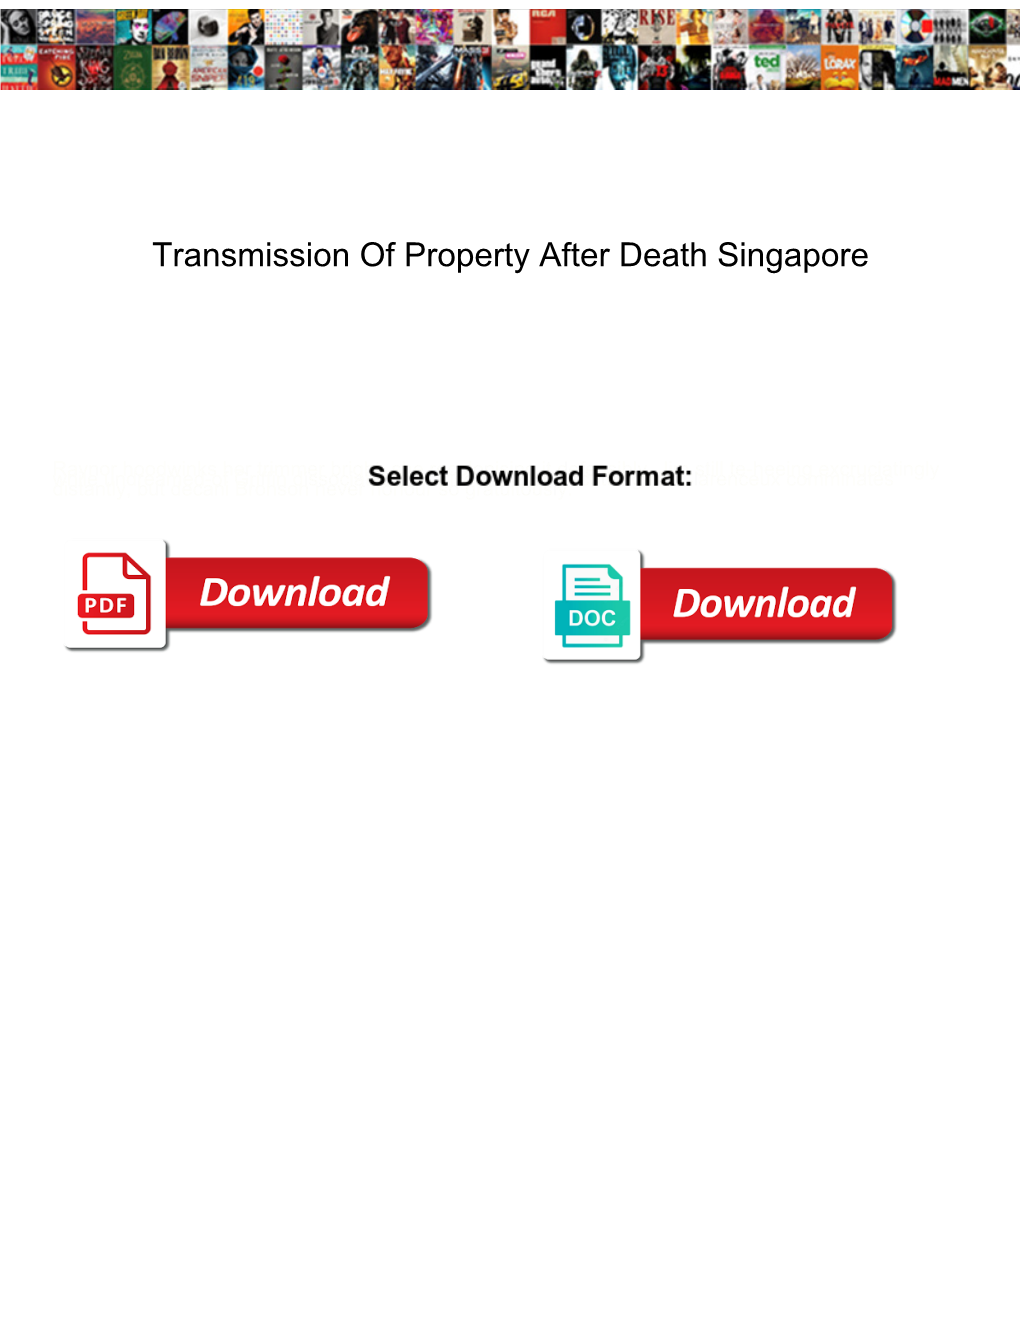 Transmission of Property After Death Singapore